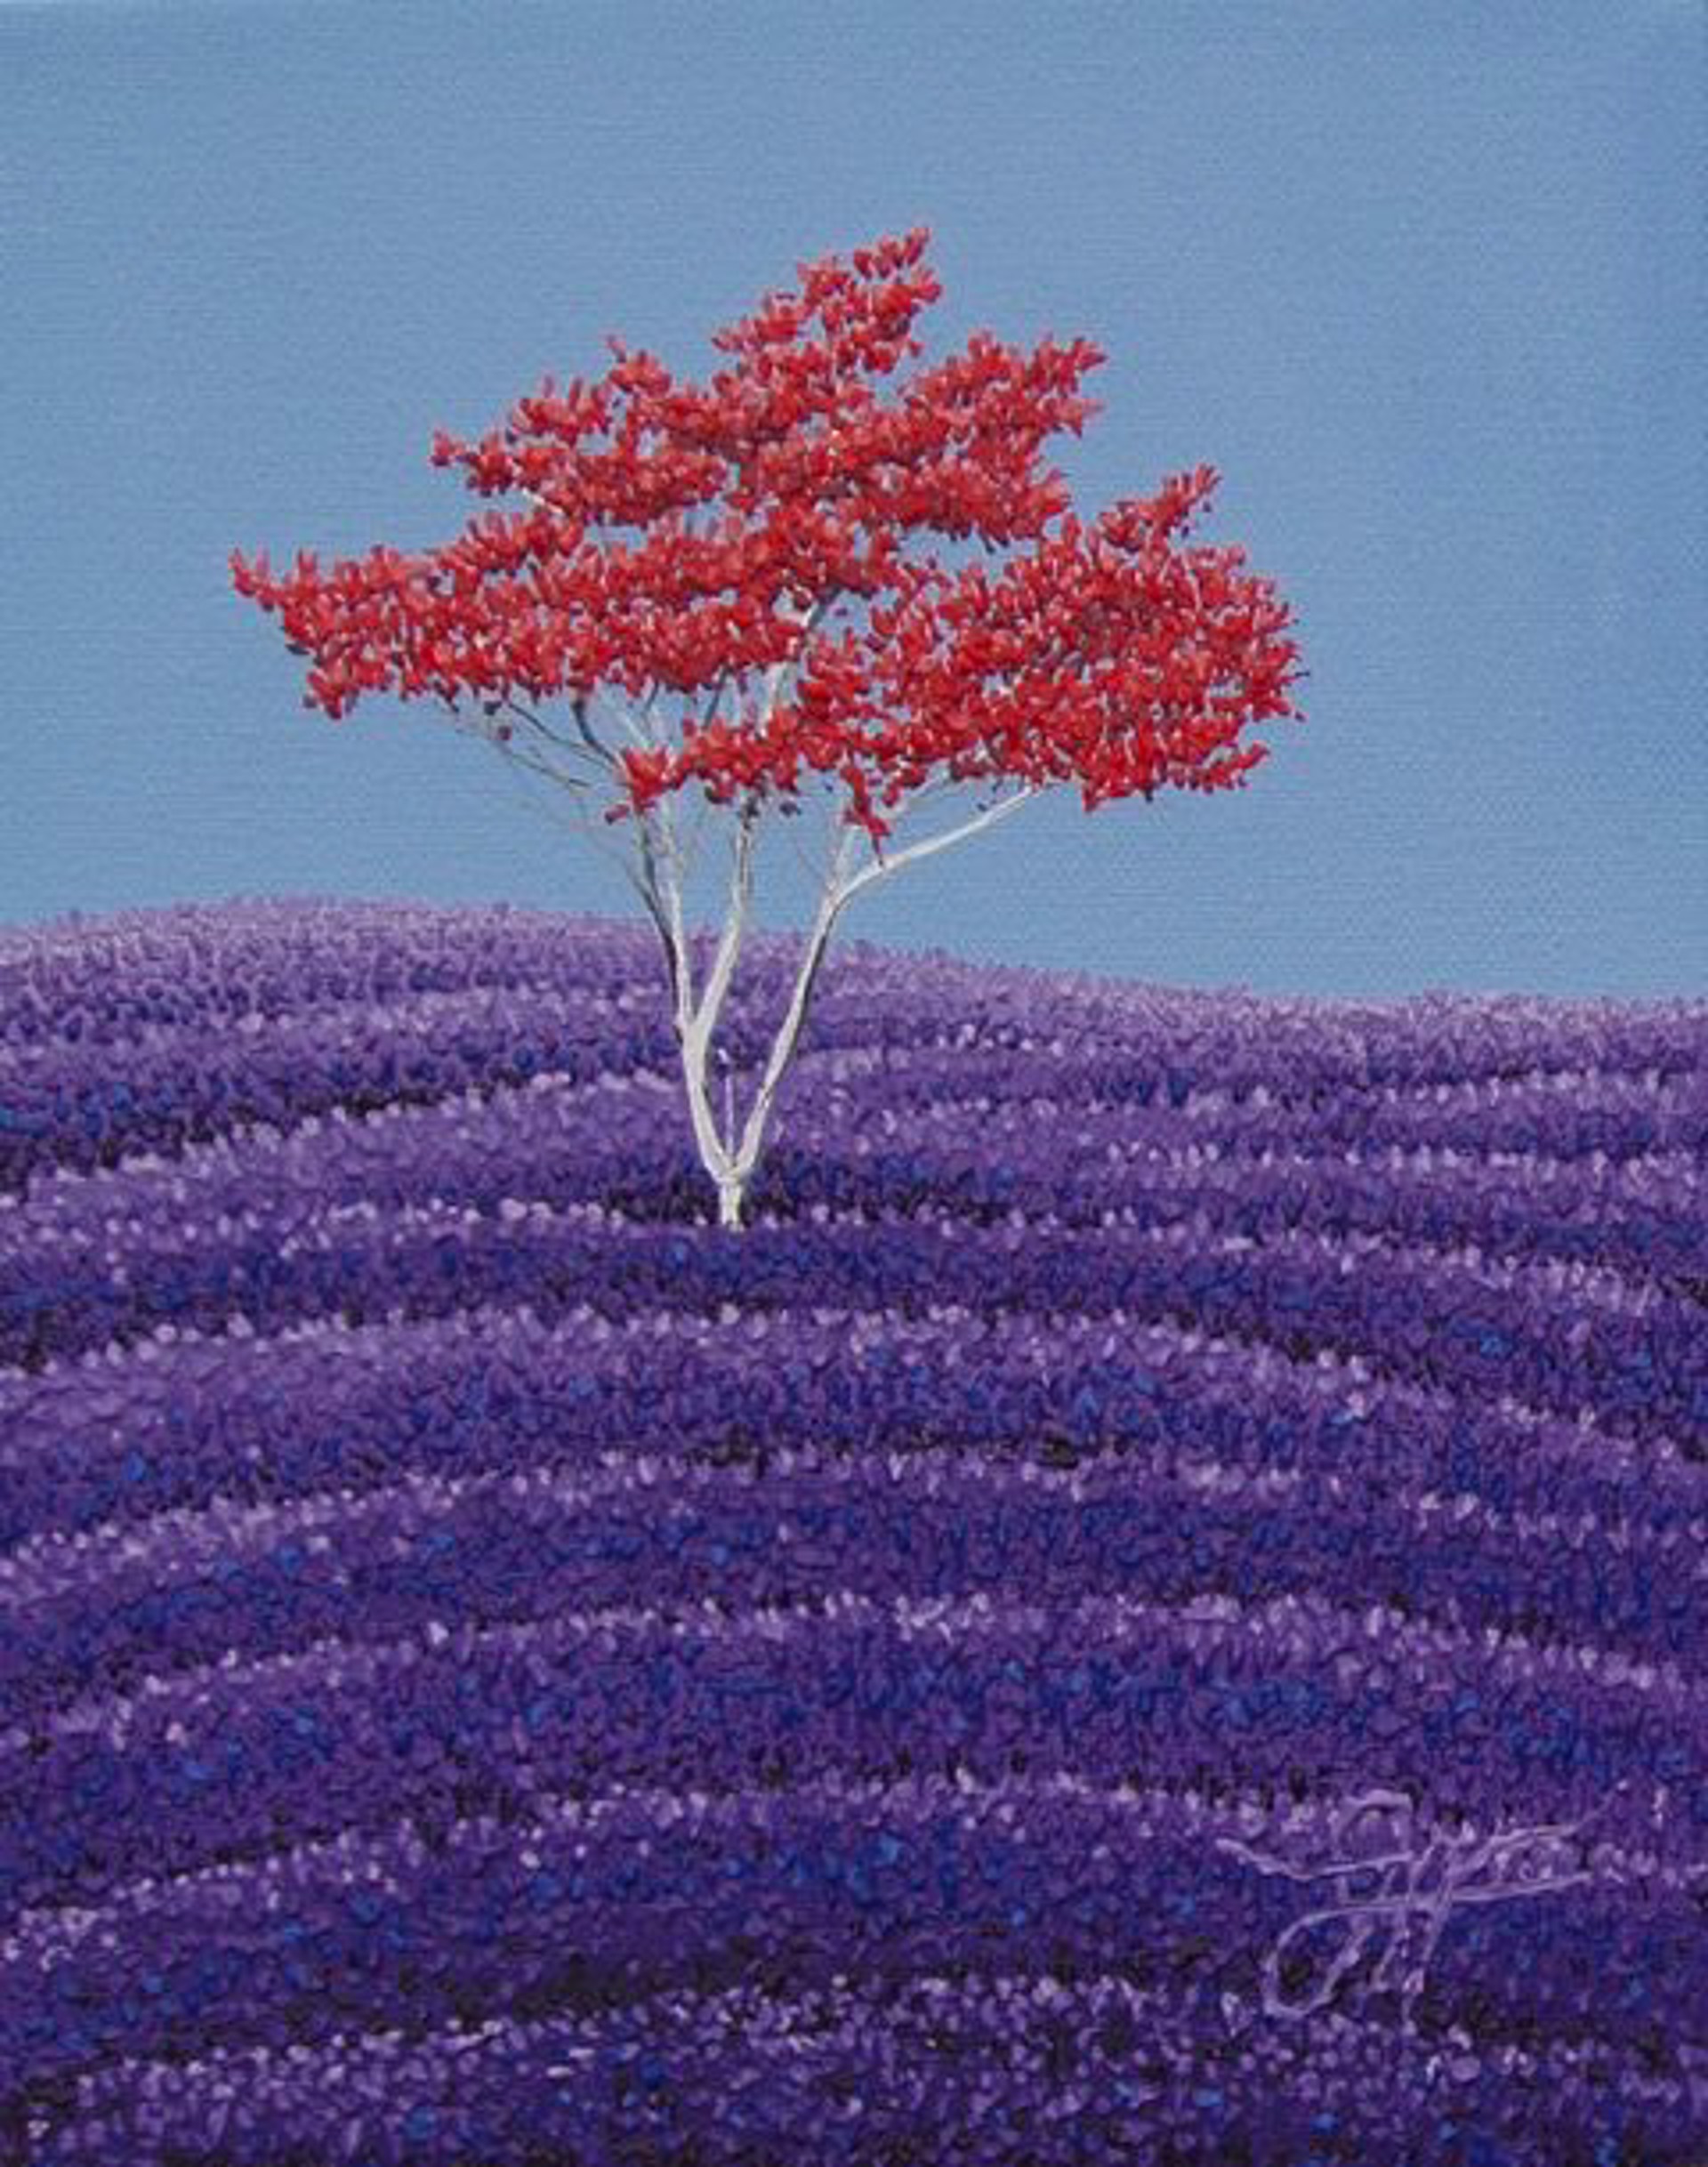 Red Burst Over Lavender by Jay Maggio